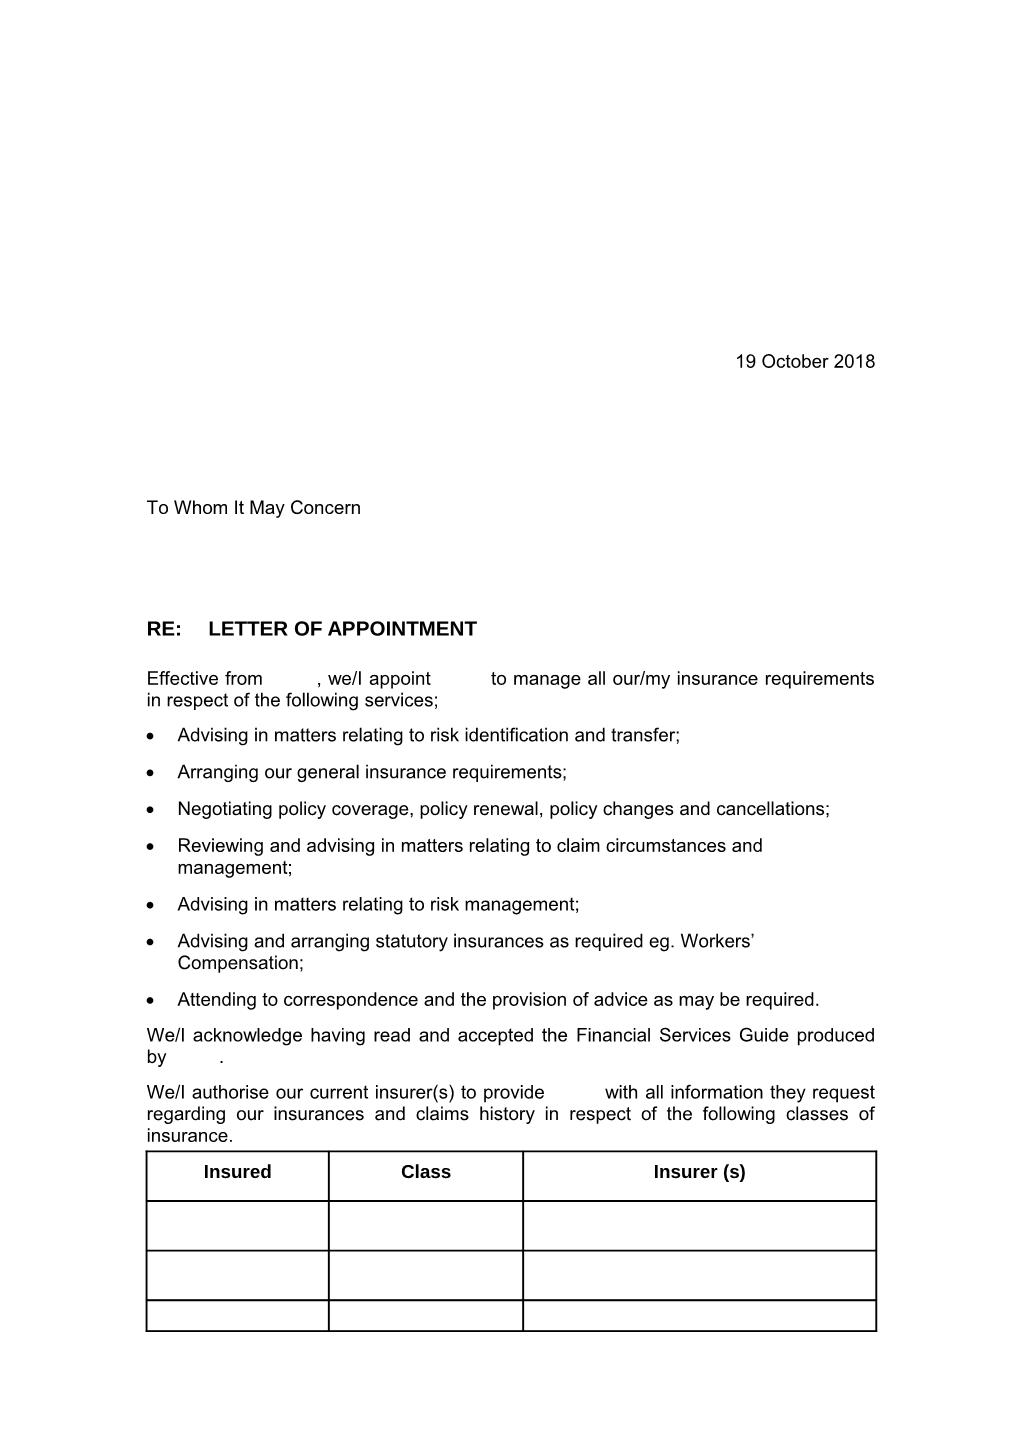 Broking Letter of Appointment